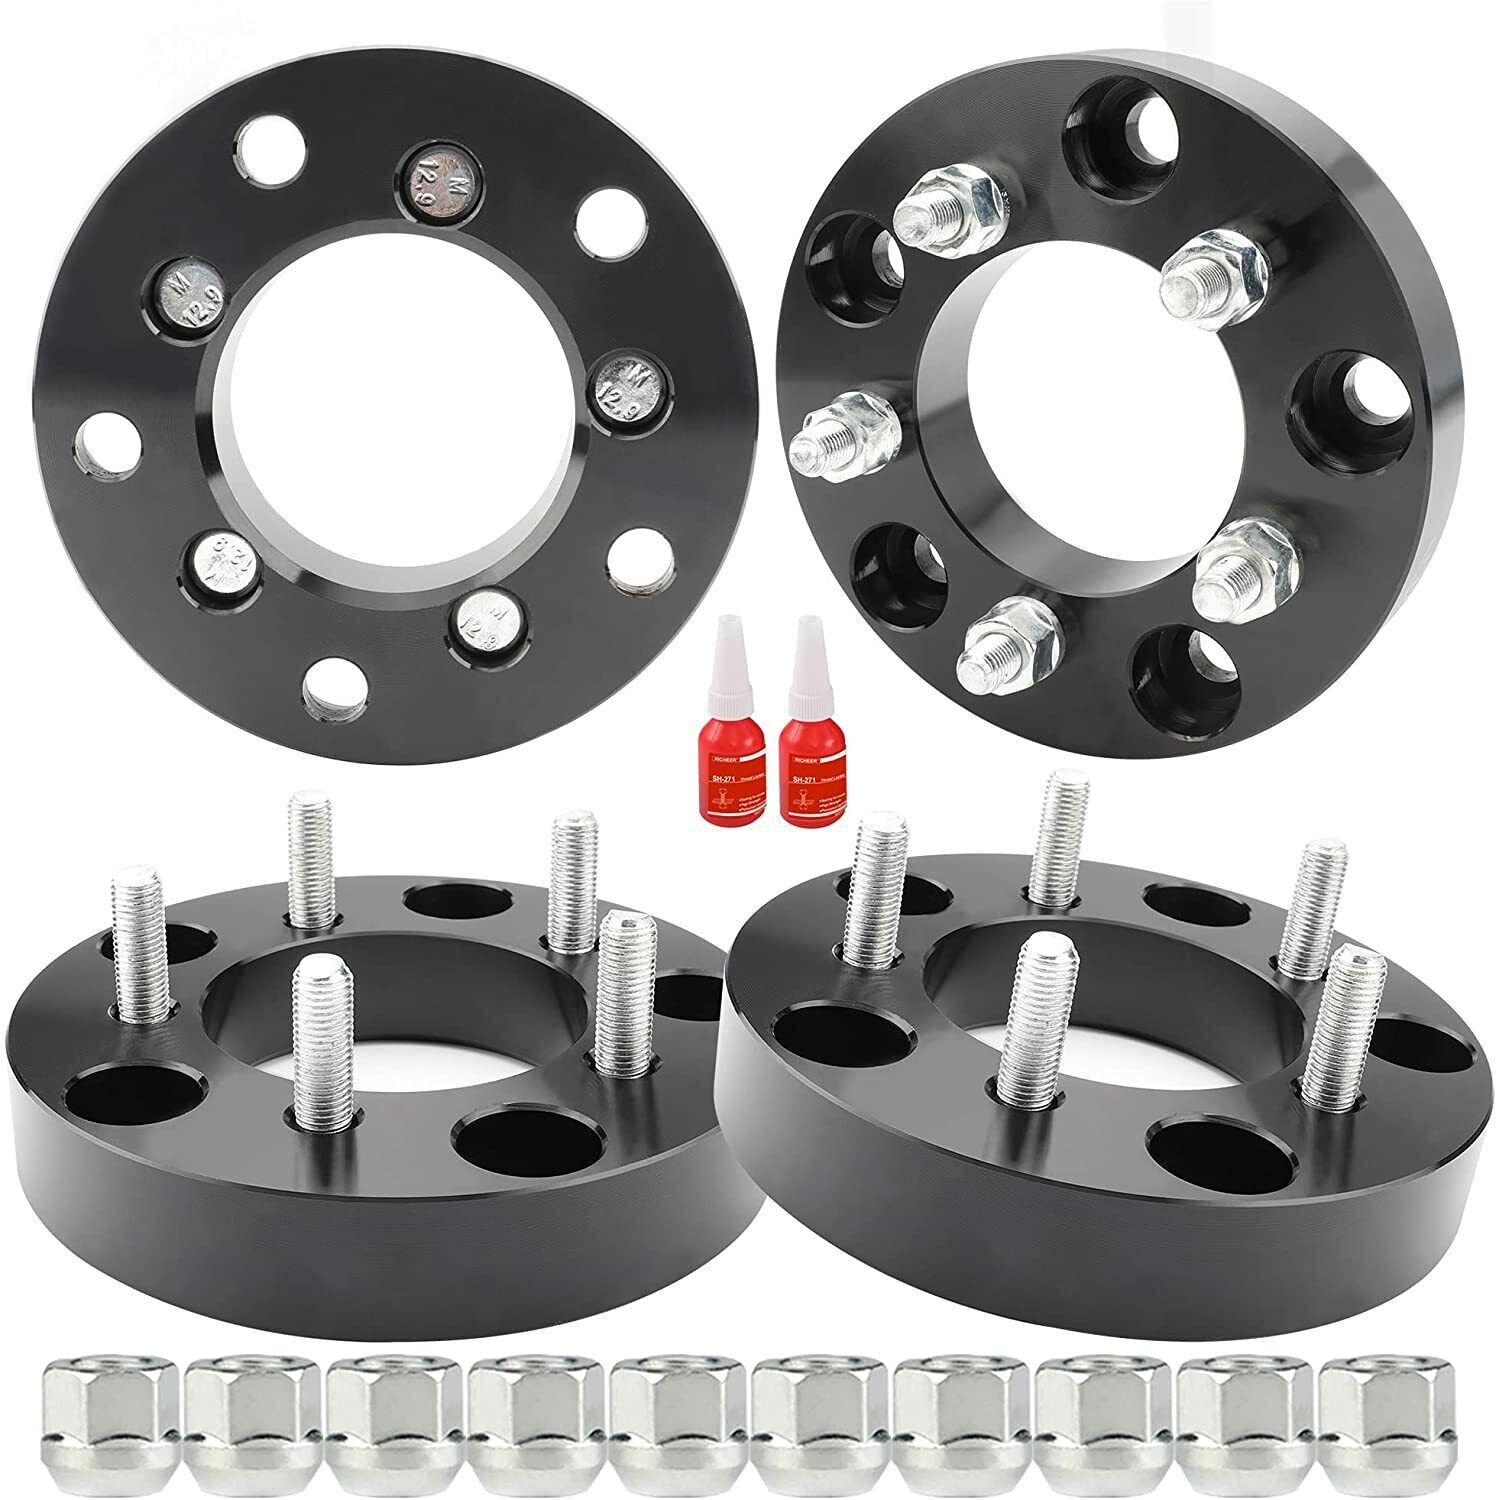 5x5.5 to 5x4.5 Wheel Adapters 1.25